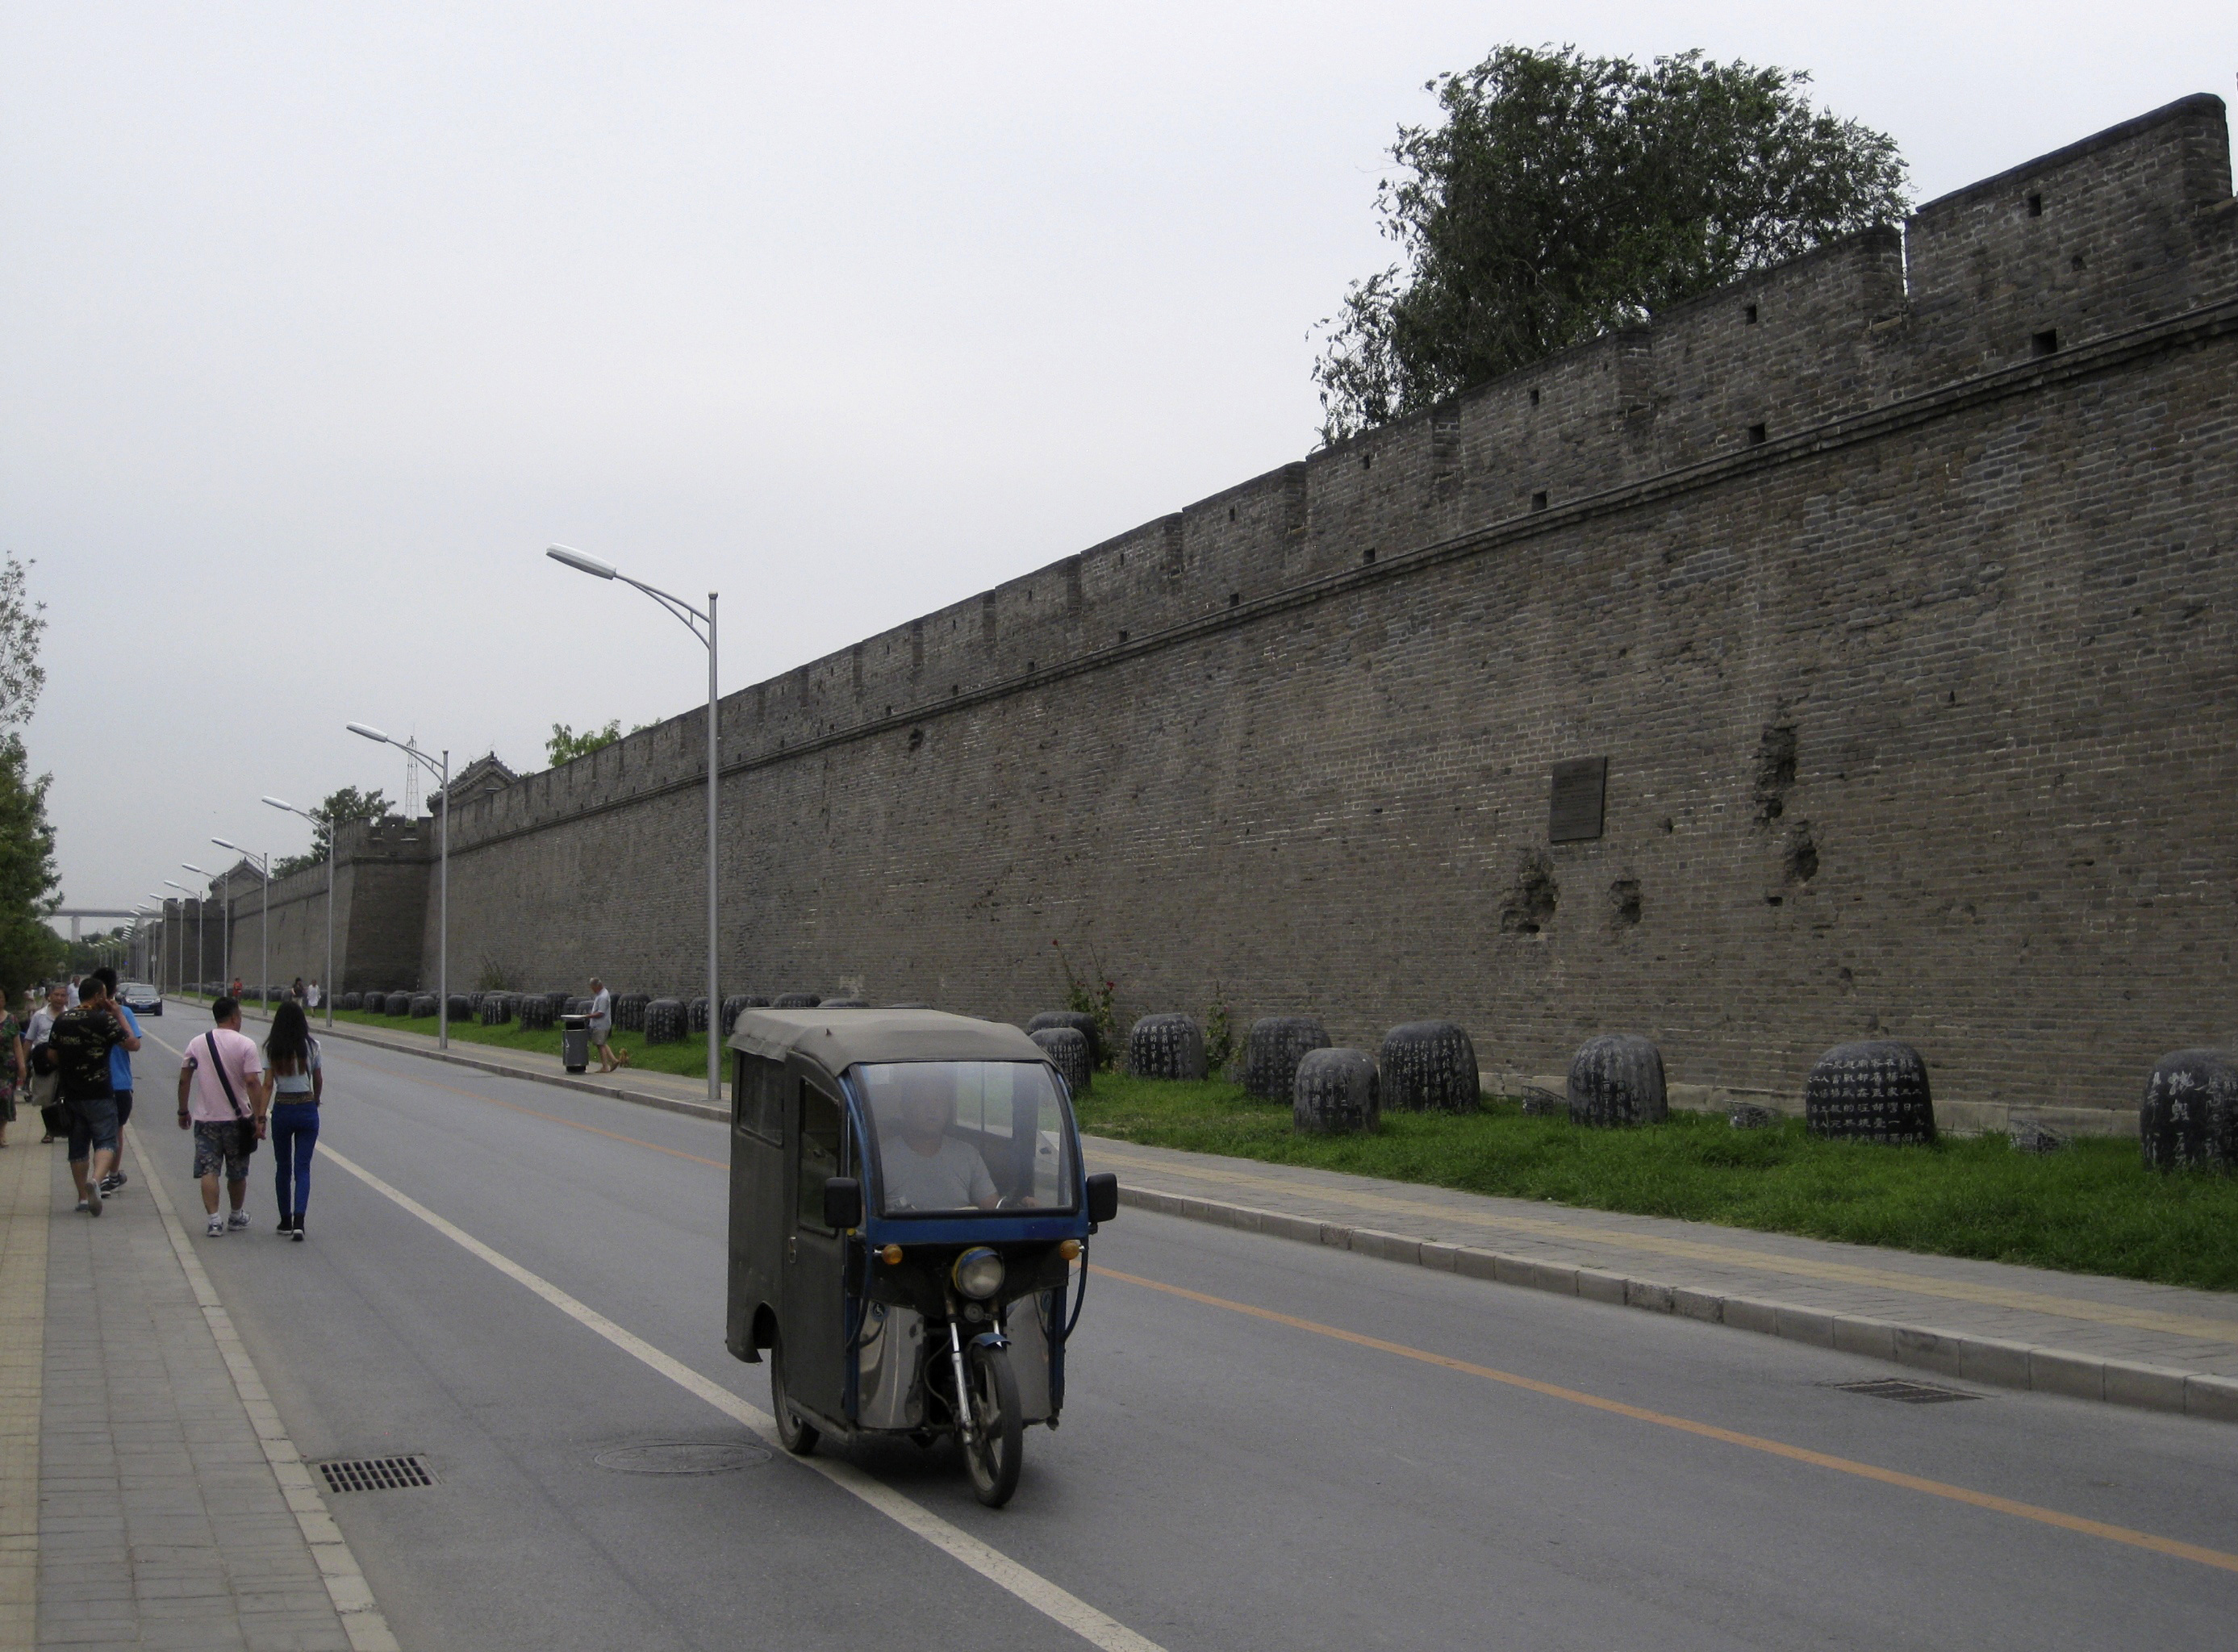 Artillery-damaged Wanping city wall with present-day stone drums commemorating events of the 2nd Sino-Japanese War (1937-45). Elevated high-speed train tracks visible in distance. Source: Author’s Collection, 2014.